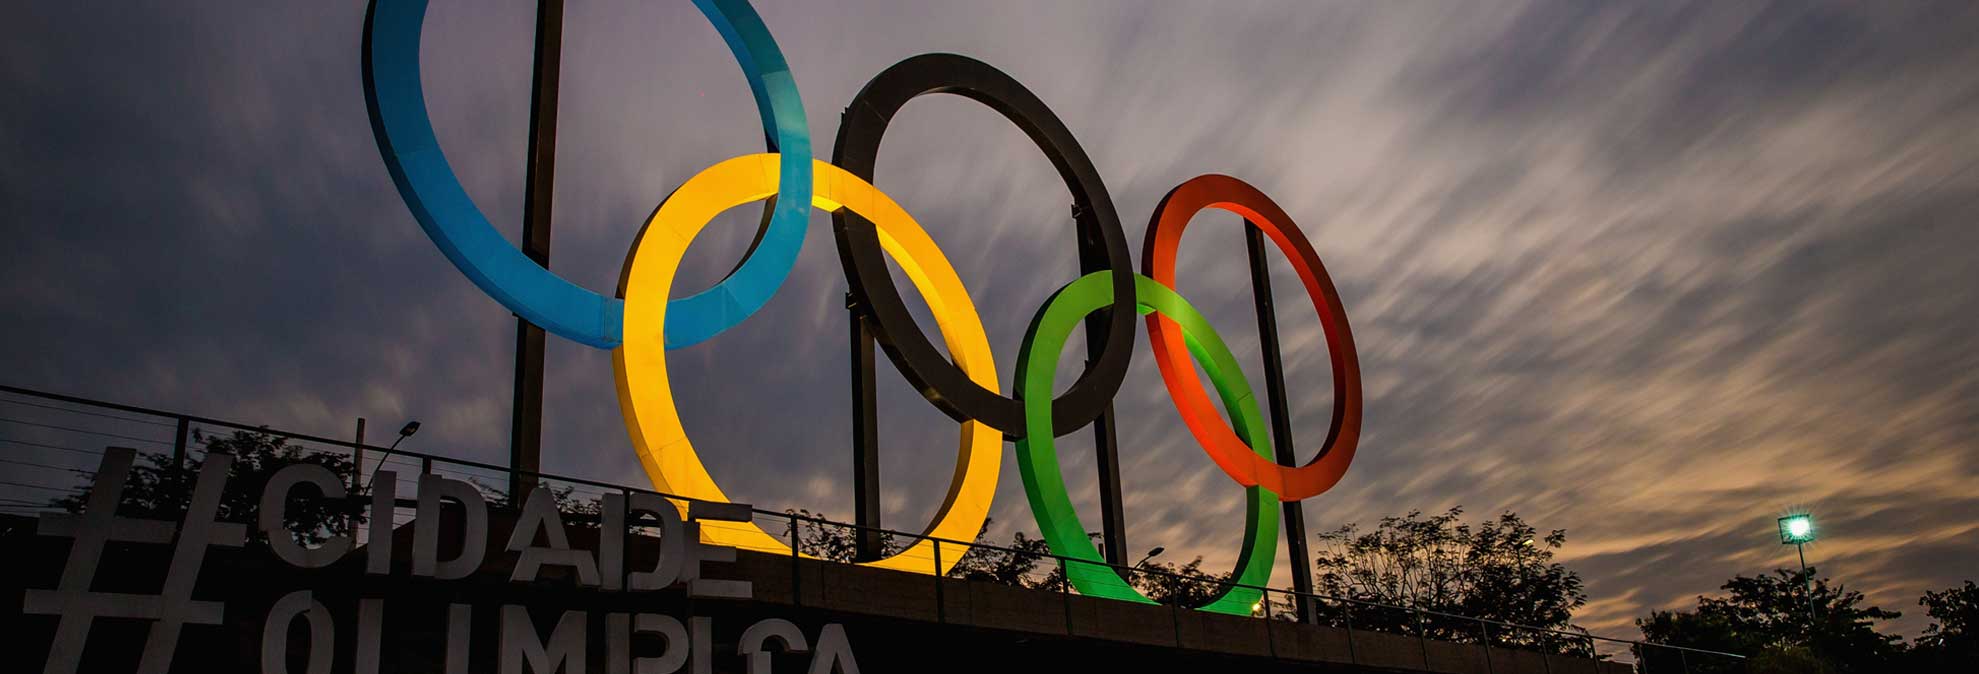 How to Watch the Rio Olympics in 4K - Consumer Reports